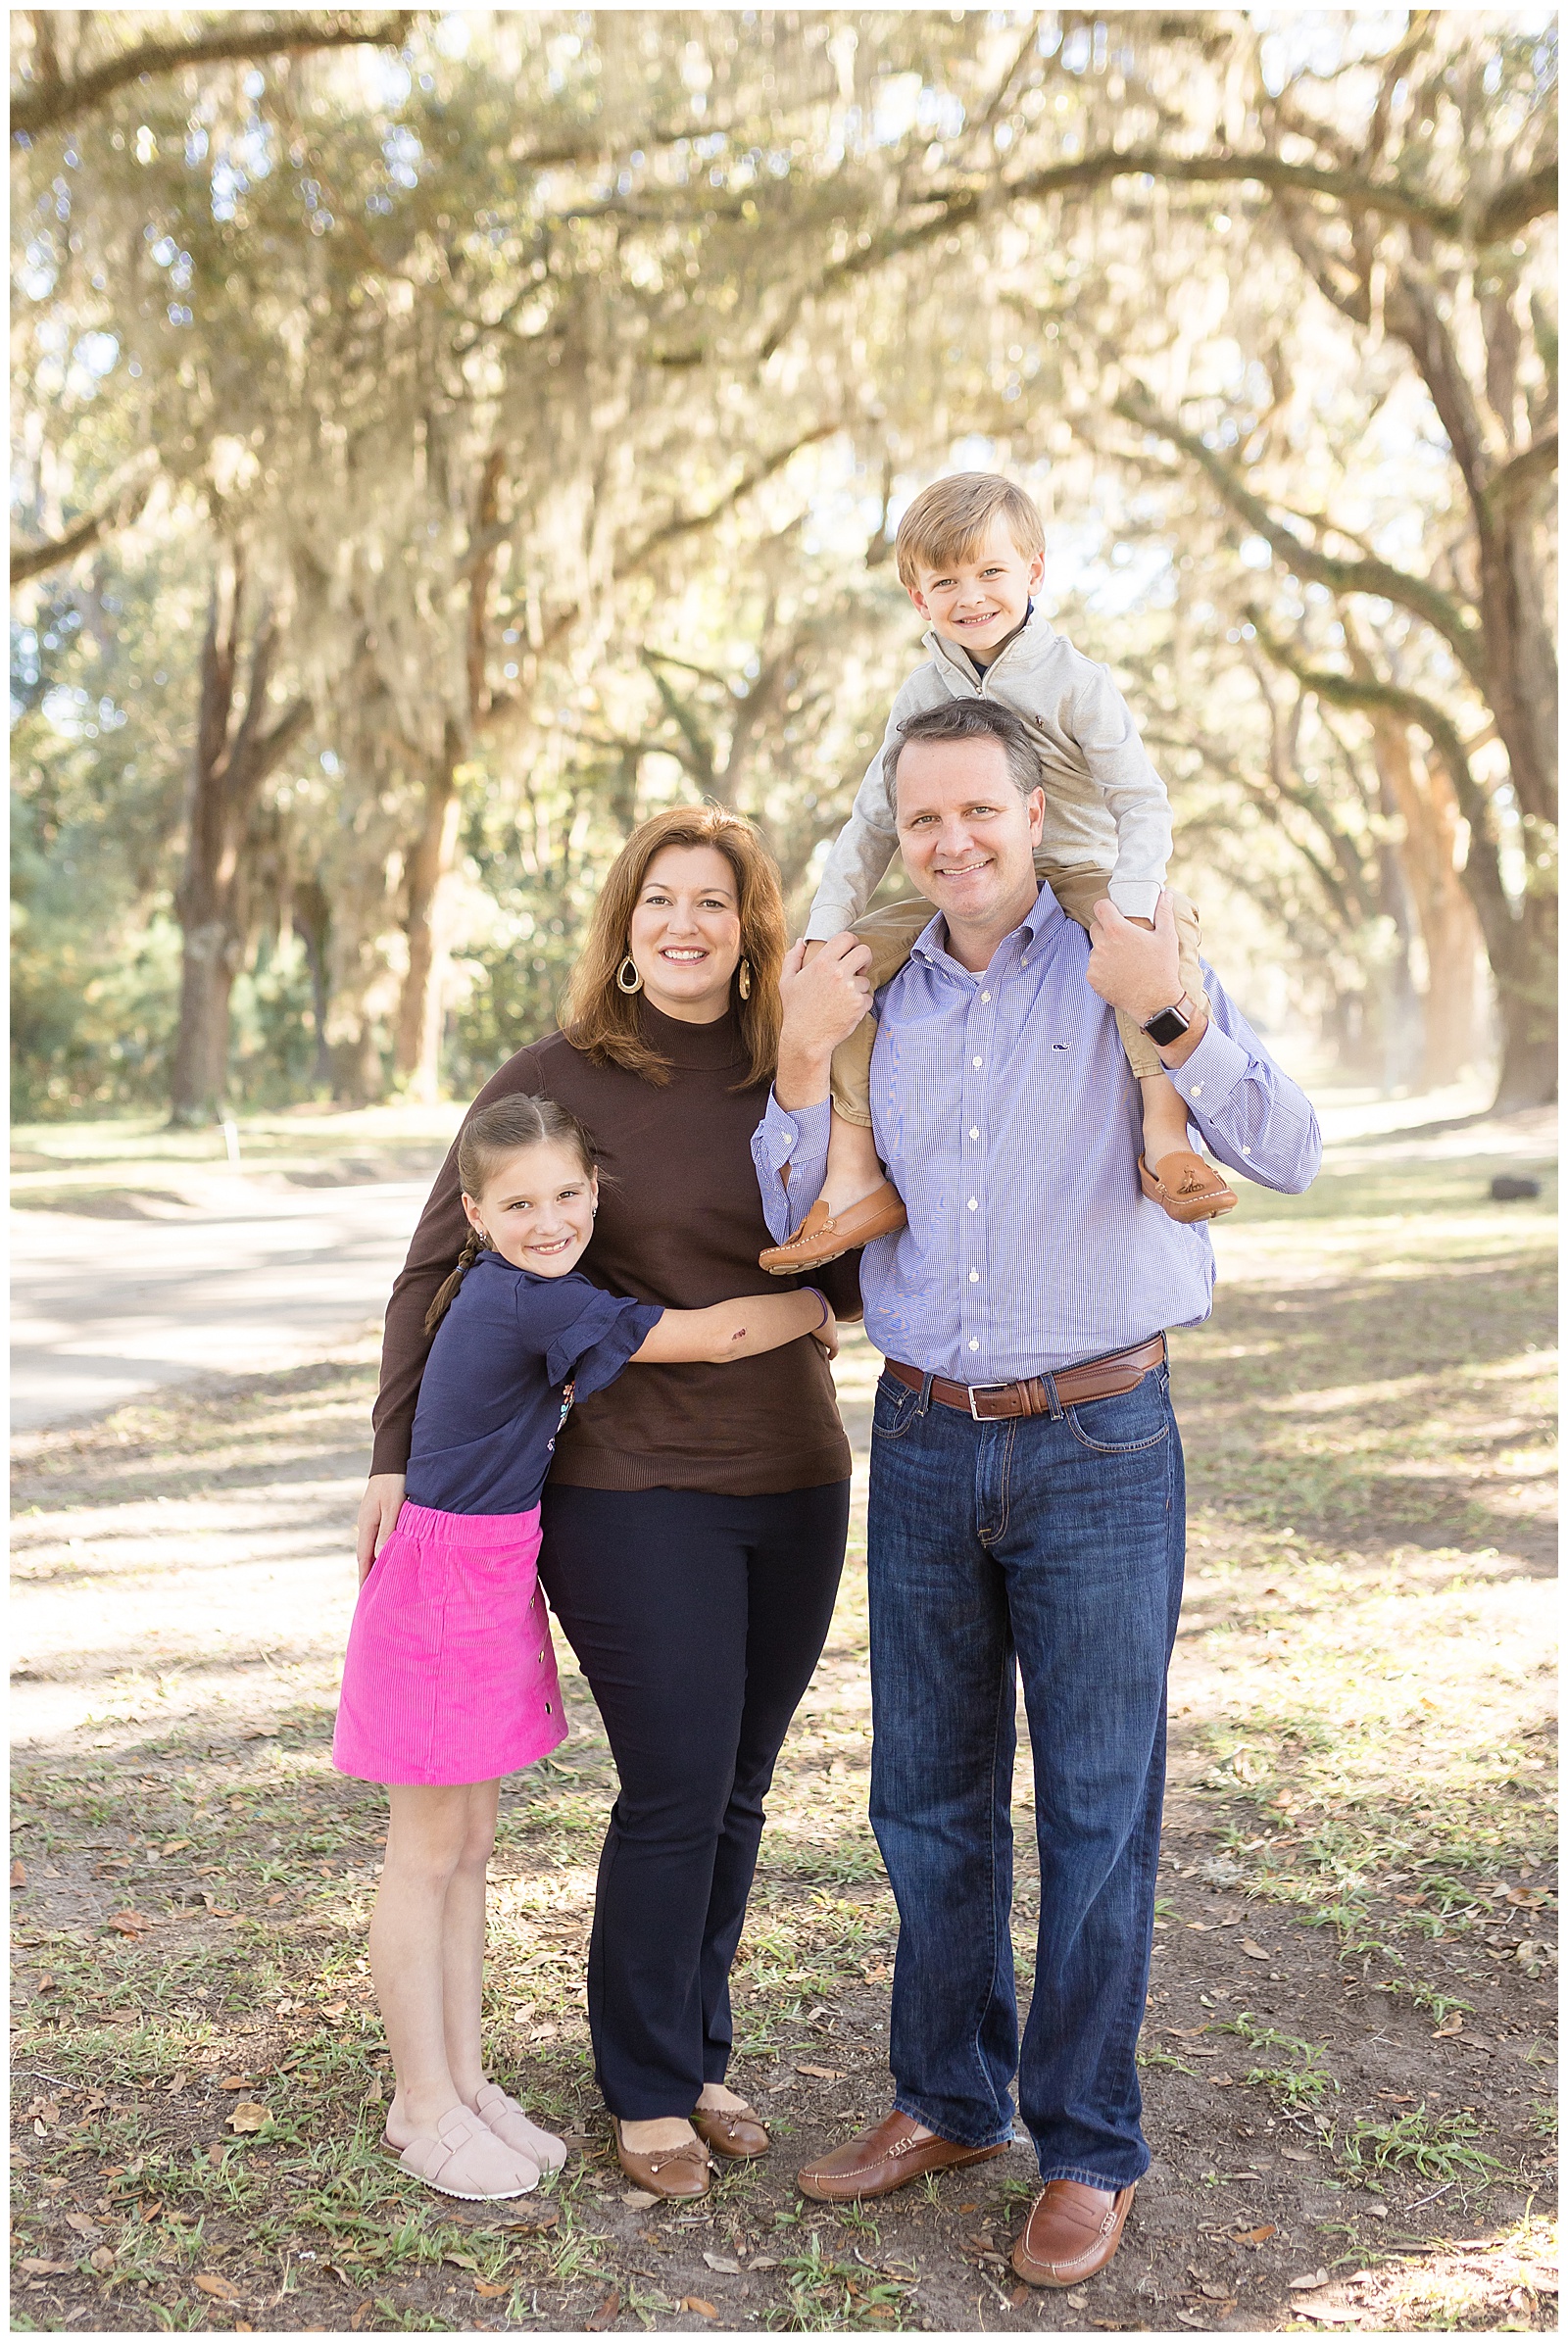 Wisp + Willow Photography Co. capture family during fall mini session in Savannah, GA.